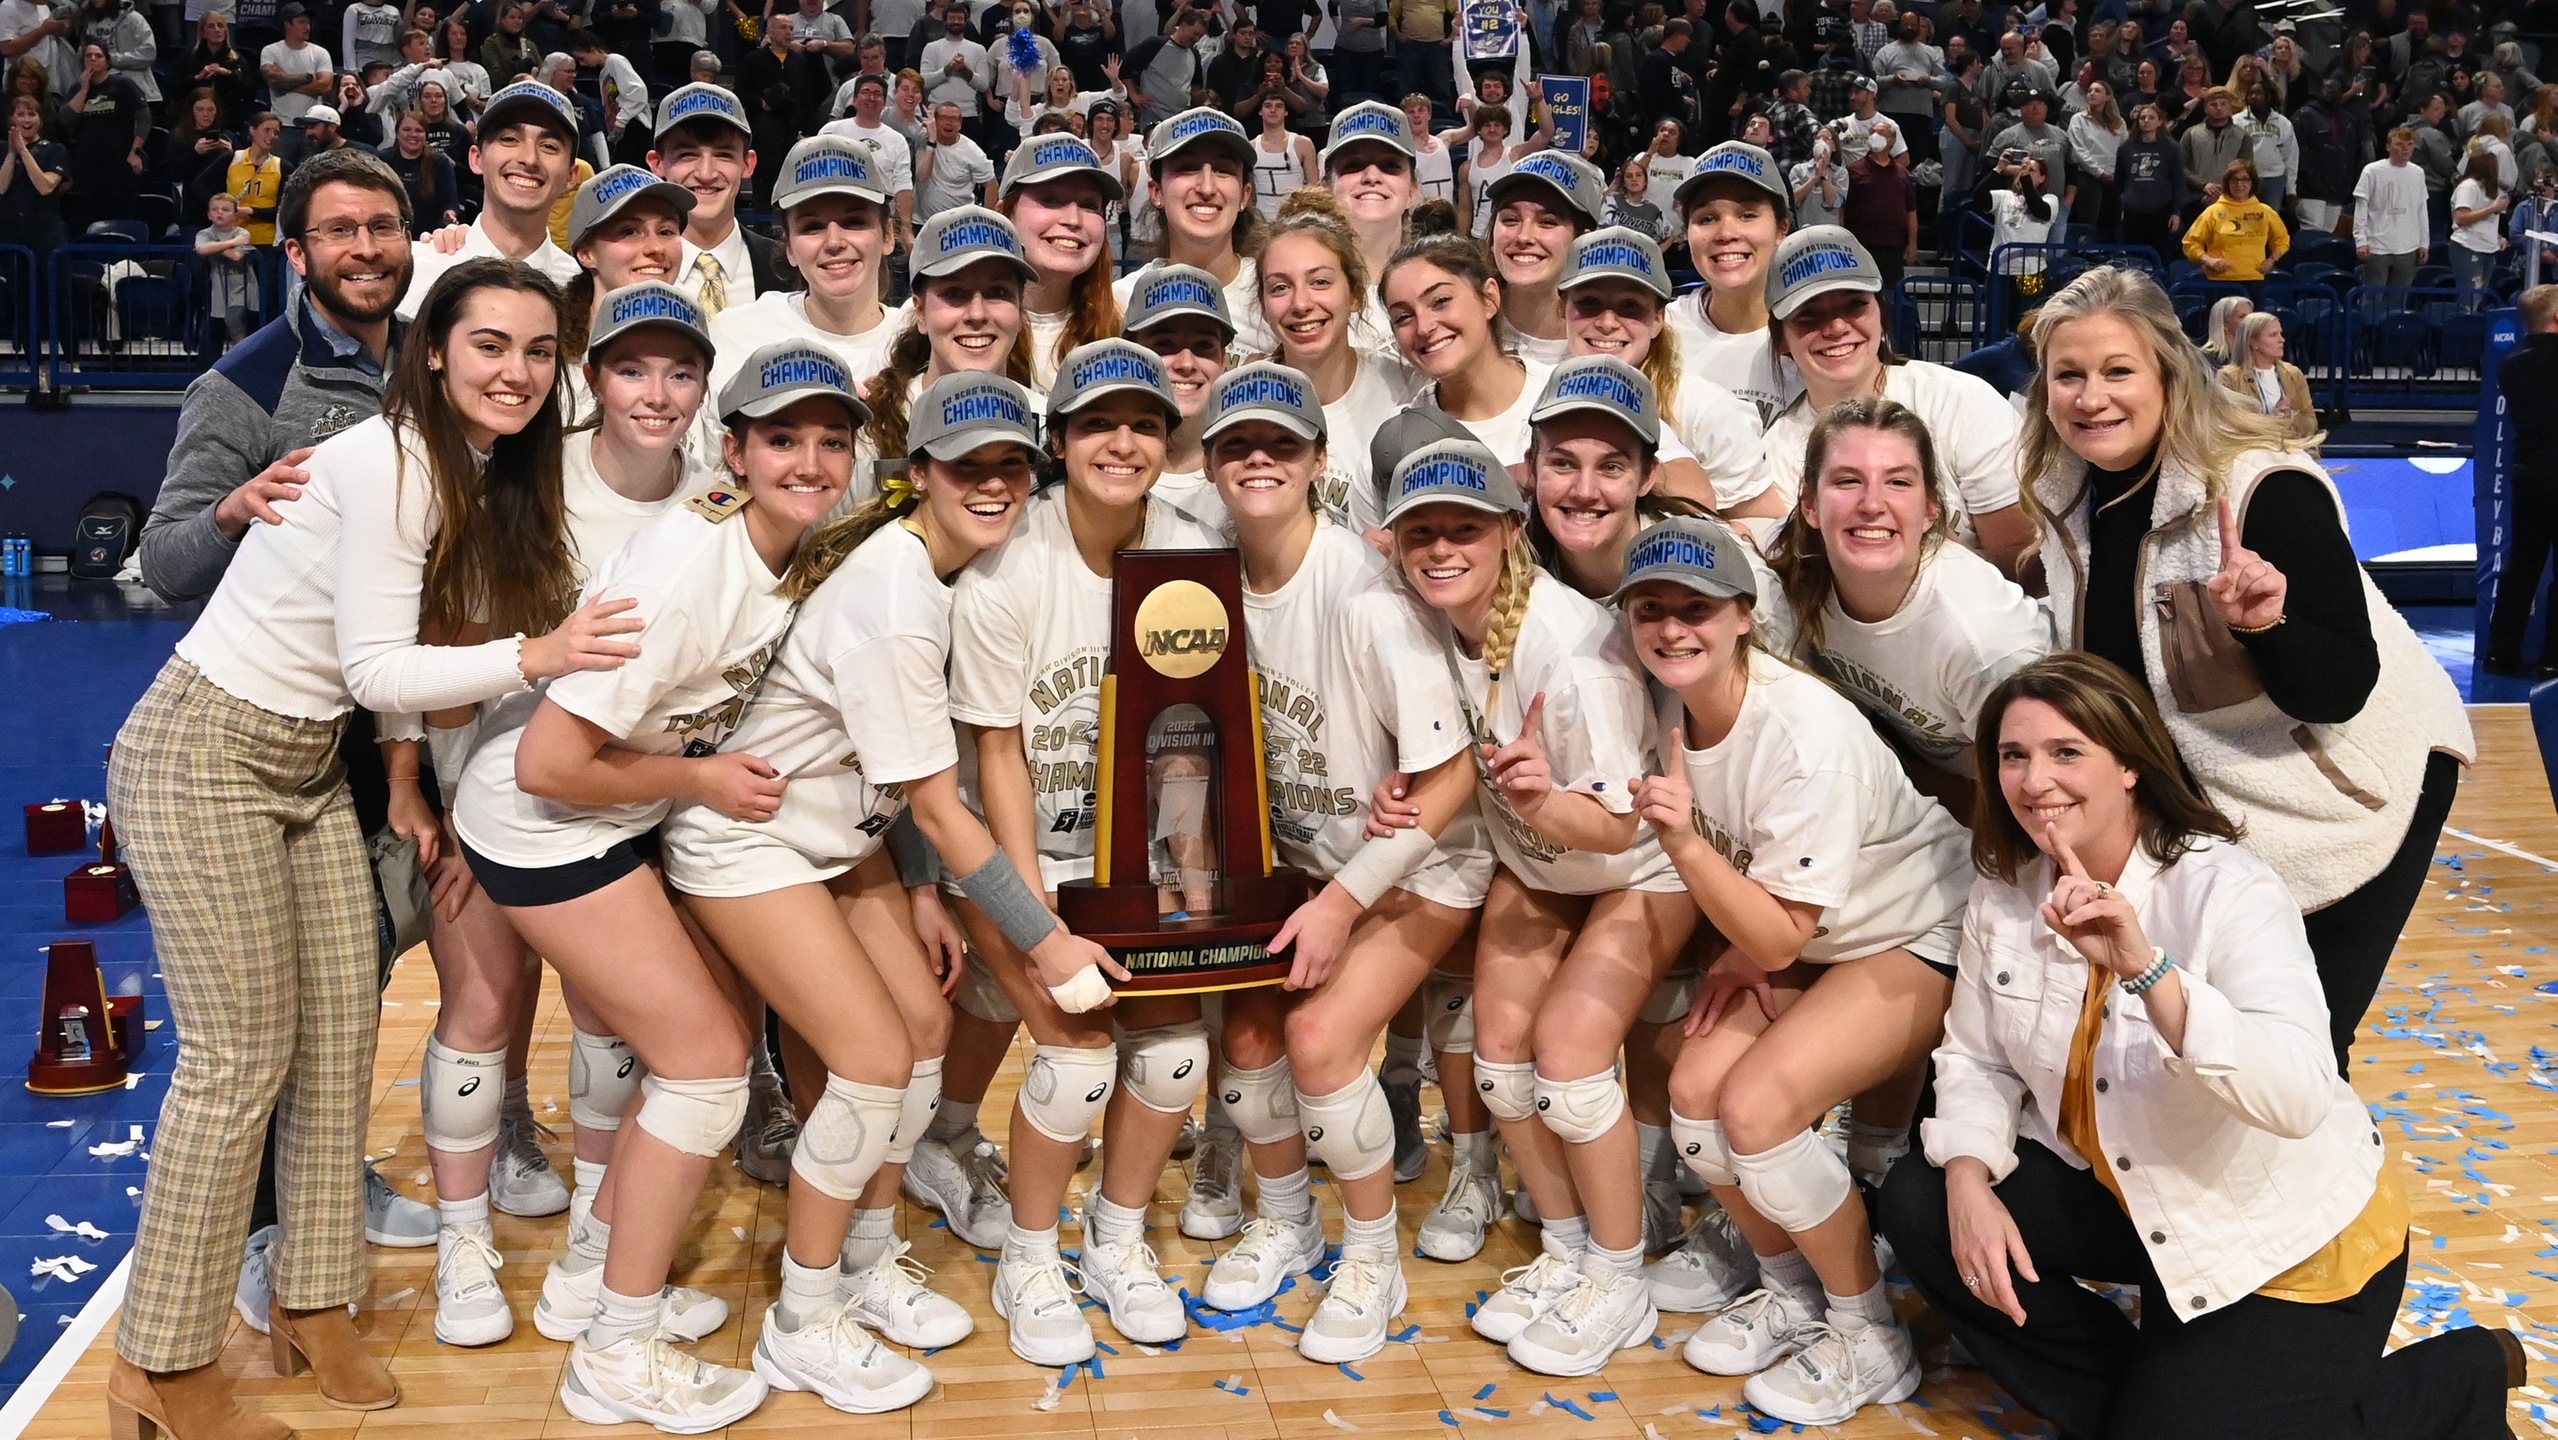 National Champions!!! Juniata Women's Volleyball is Back on Top of the Volleyball World